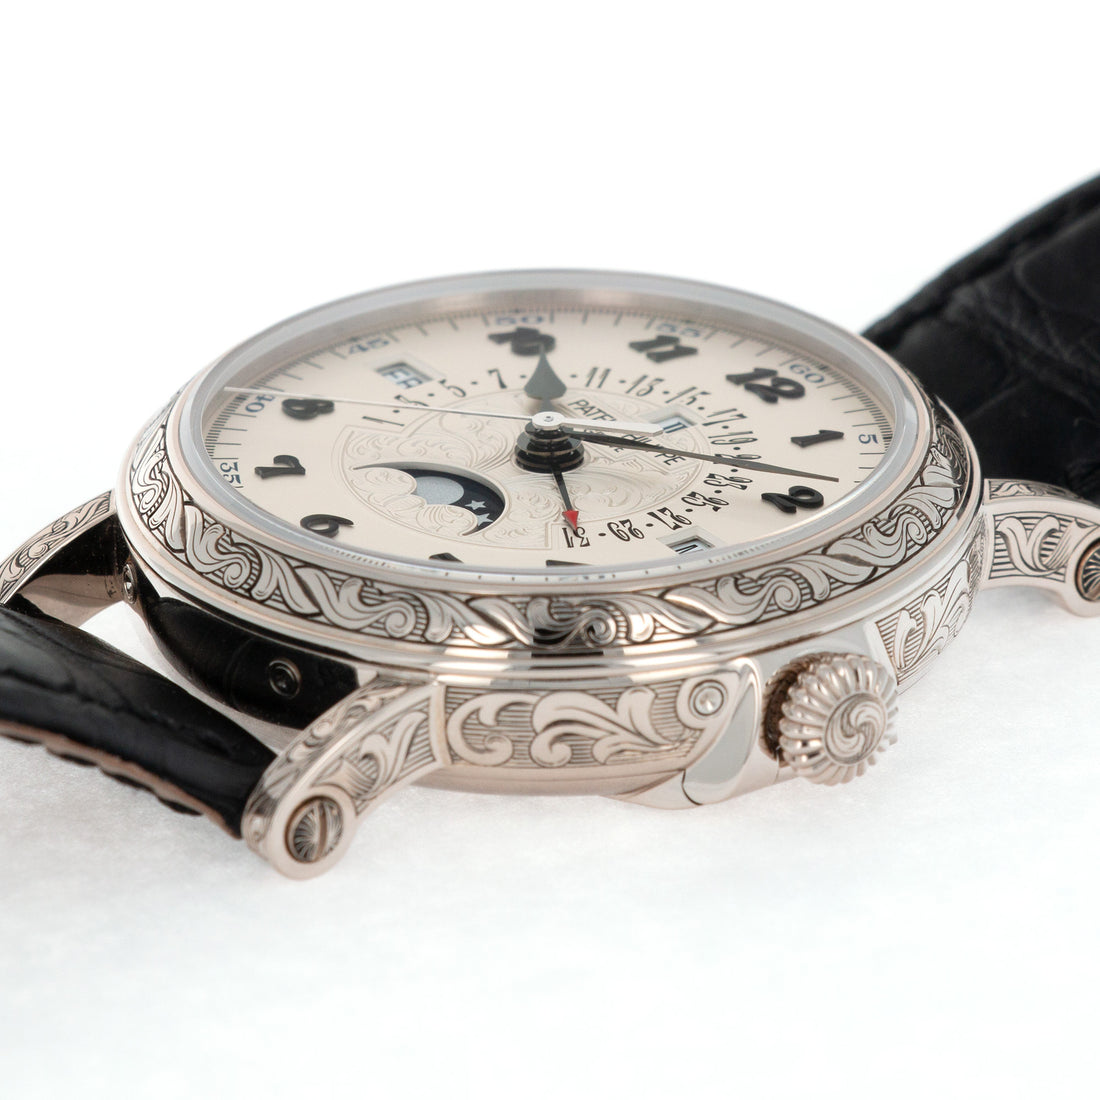 Patek Philippe White Gold Perpetual Calendar Watch Ref. 5160, Retailed by Tiffany & Co.